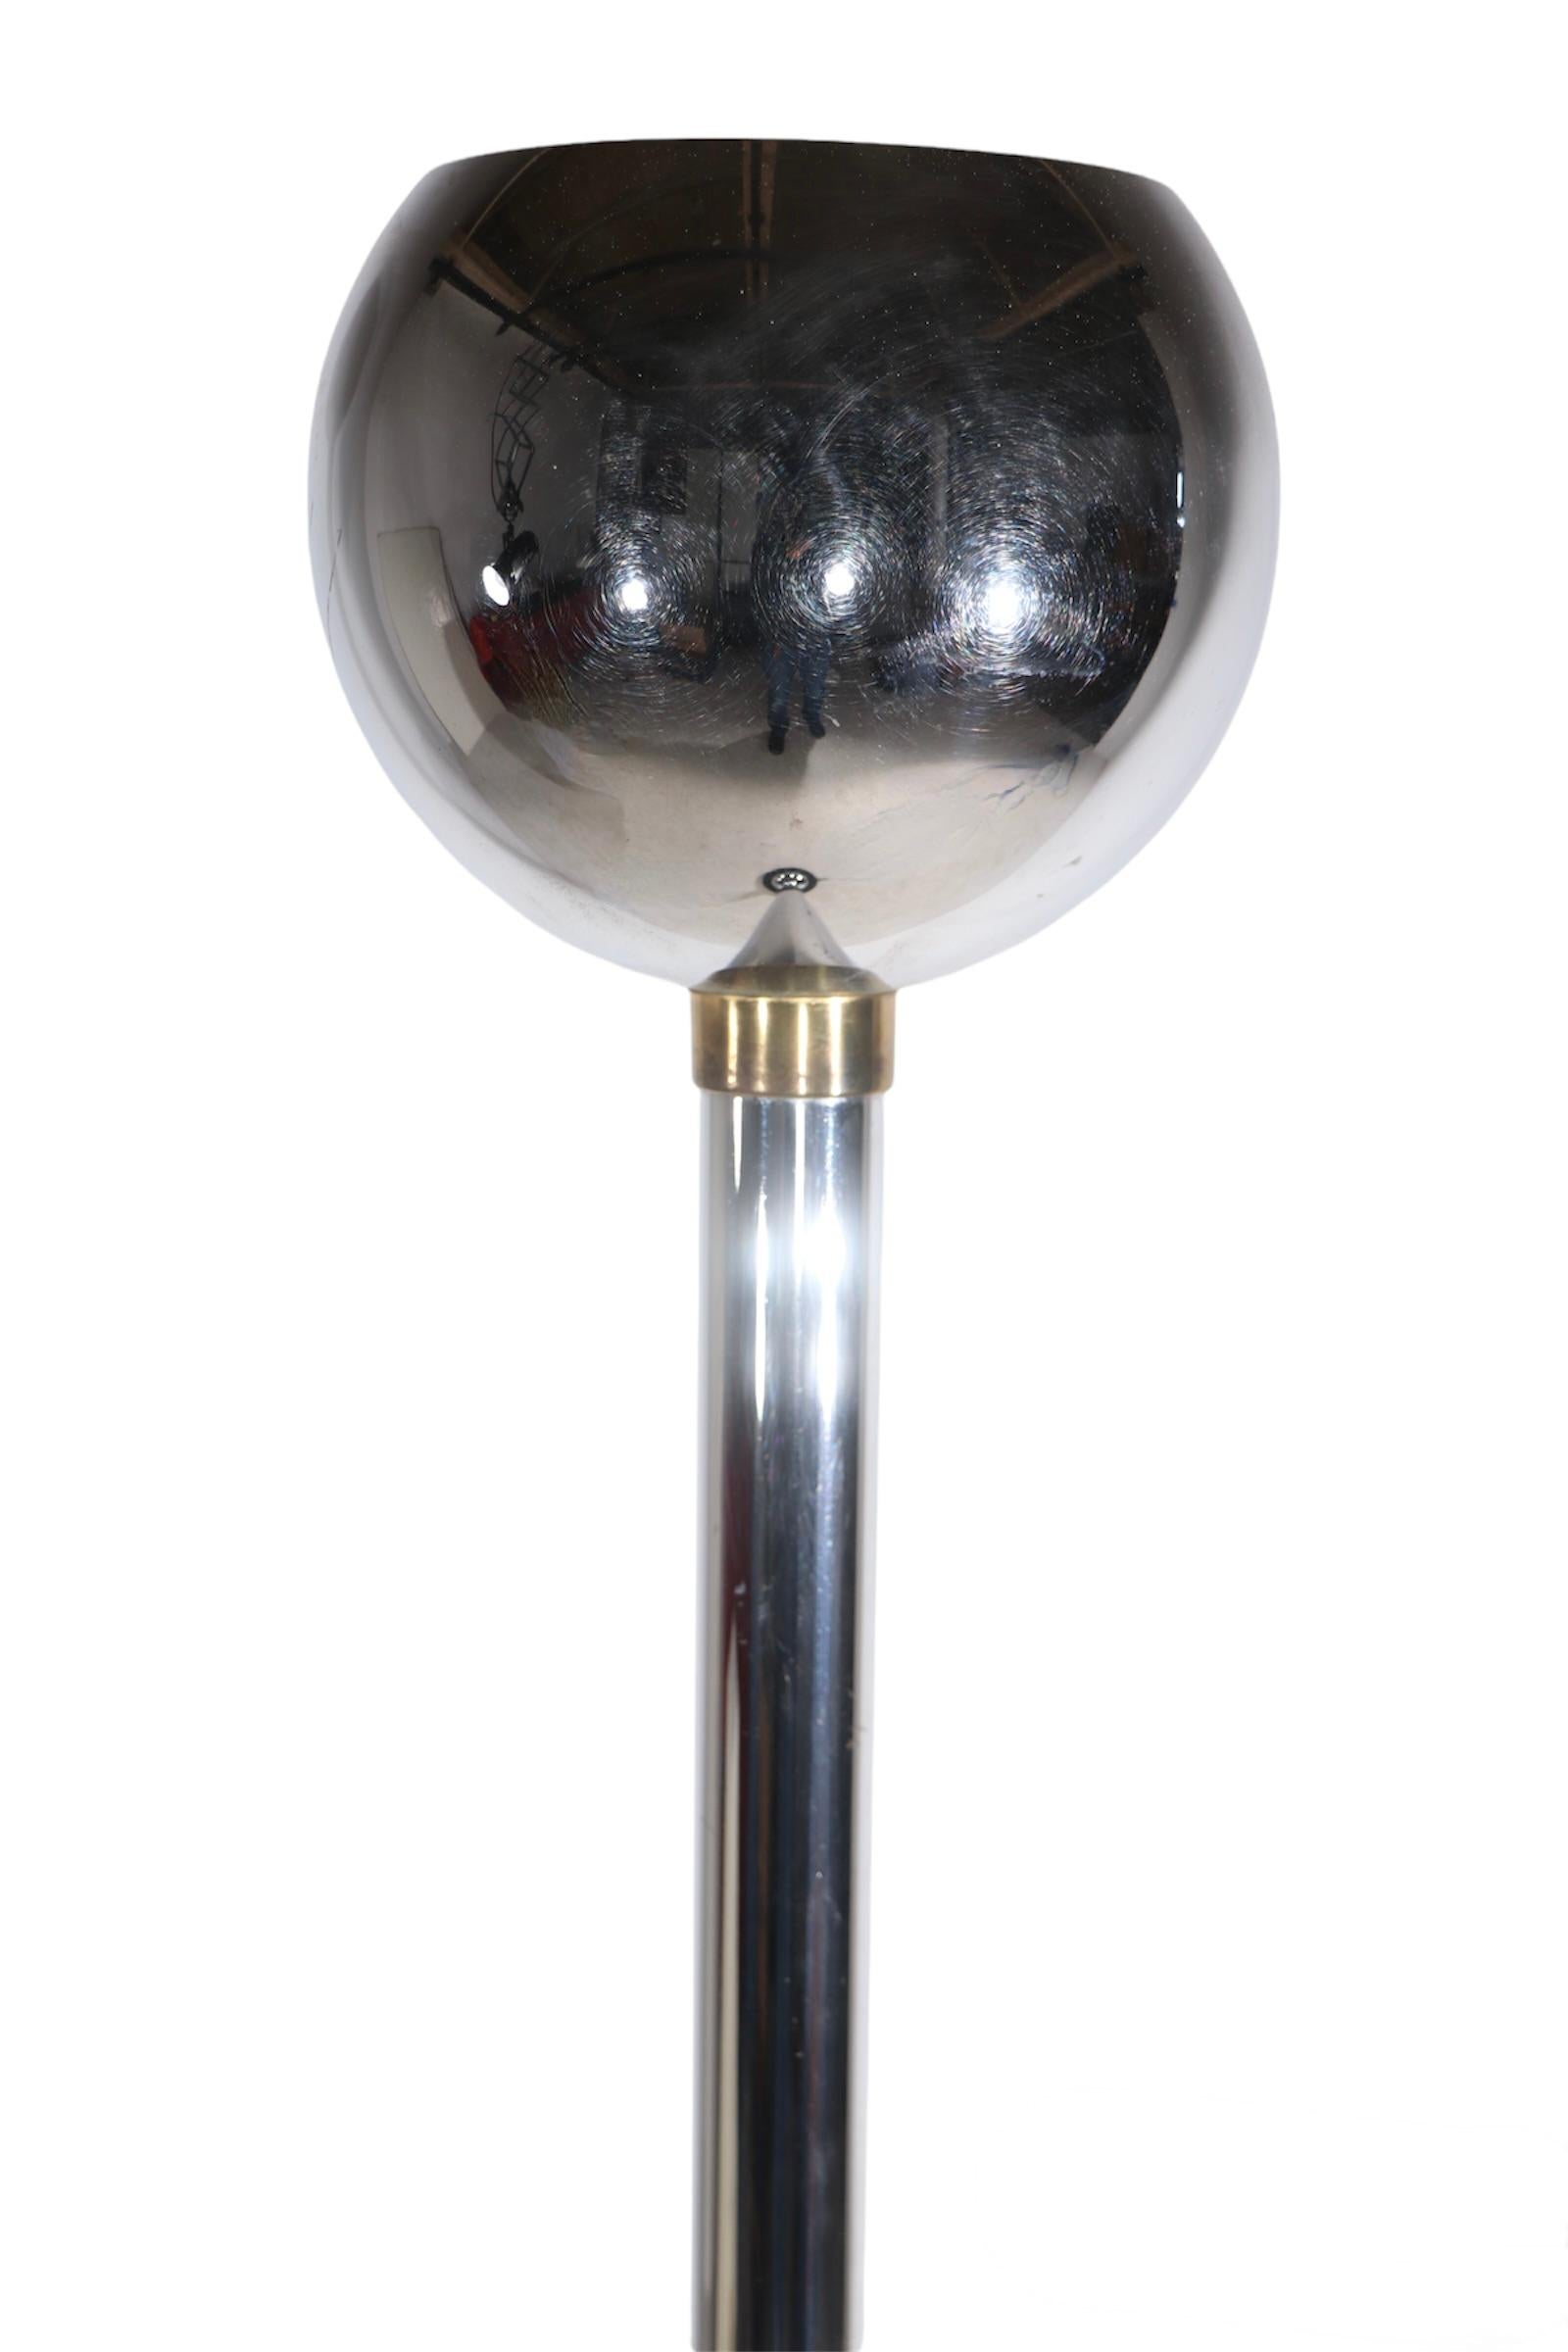 Rare Machine Age, Art Deco chrome and black uplight, torchiere, in very good, original, clean and working condition. Circa 1930's design in the style of Rohde, Deskey, Von Nessen etc, unsigned. Round ball top ( 10 in Dia. ) on tubular chrome center